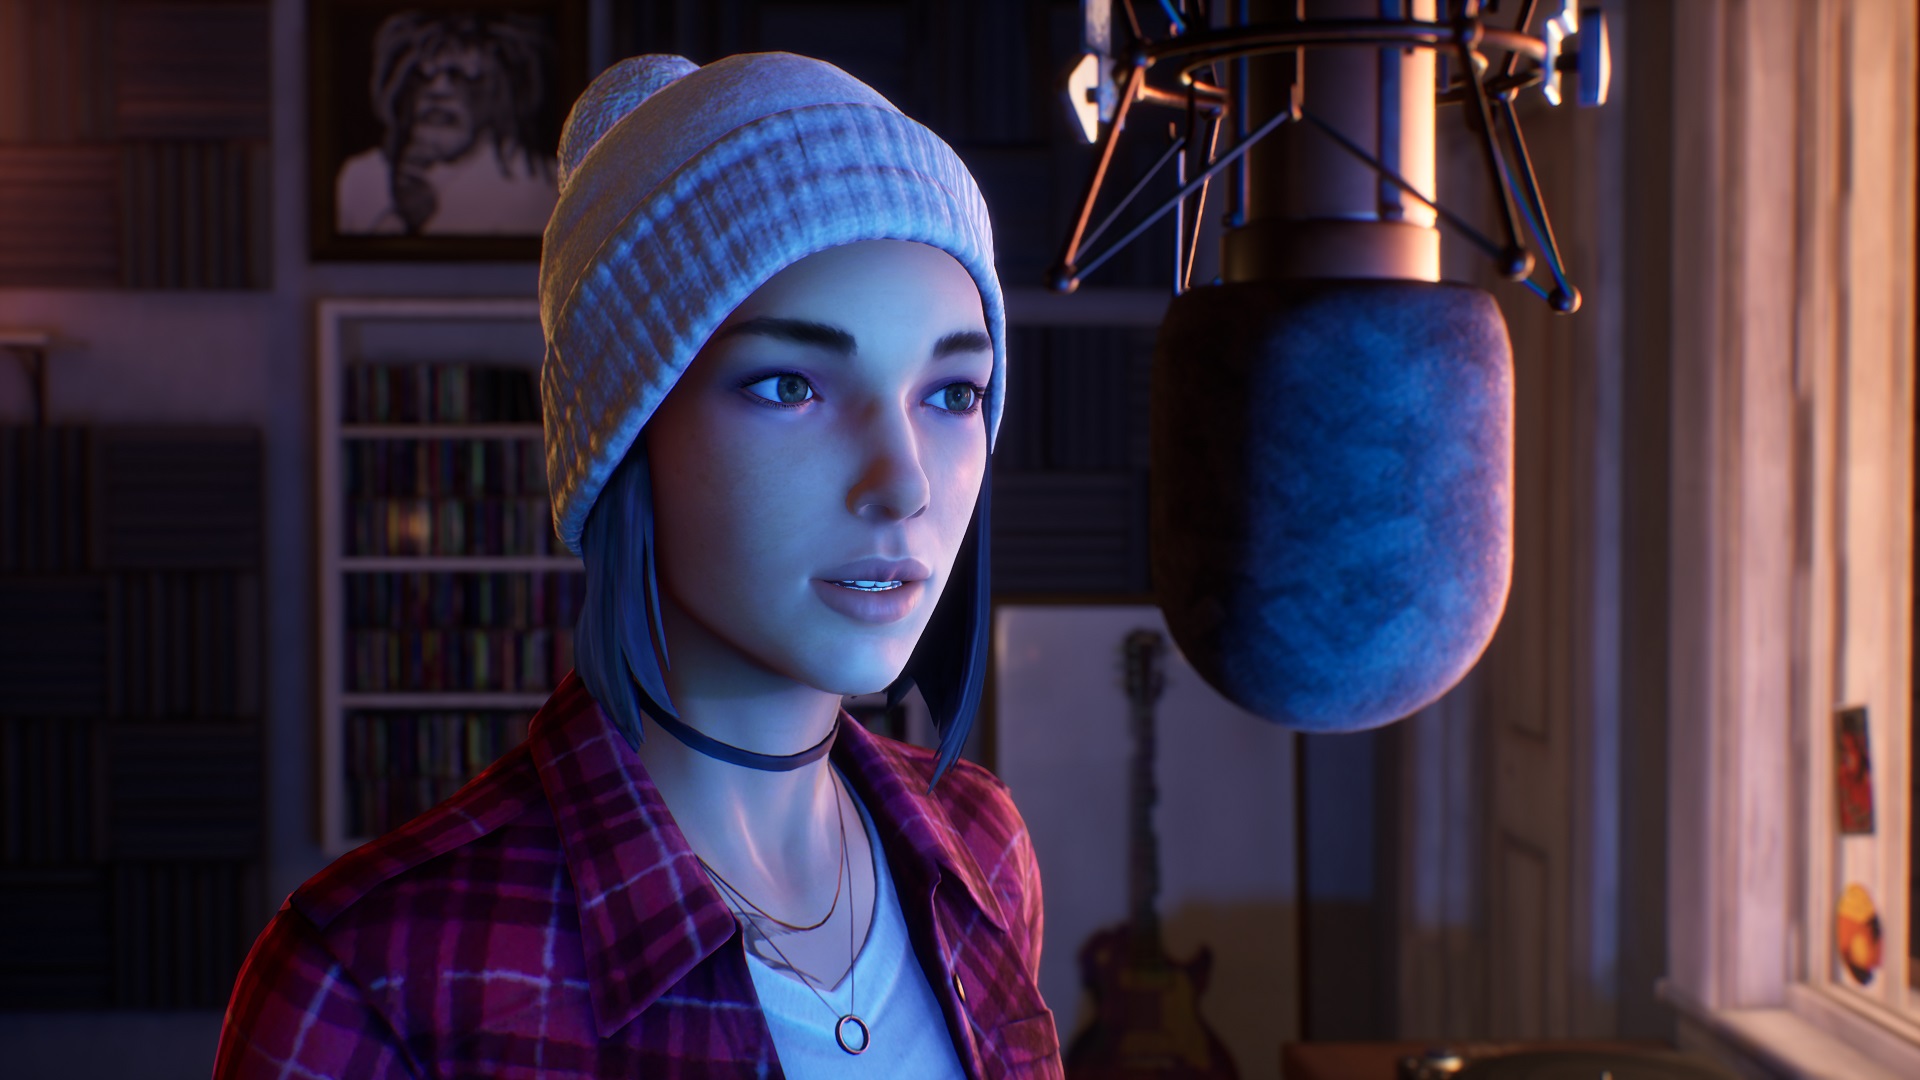 Life is Strange: Wavelengths Wants to Explore What Makes Steph Special